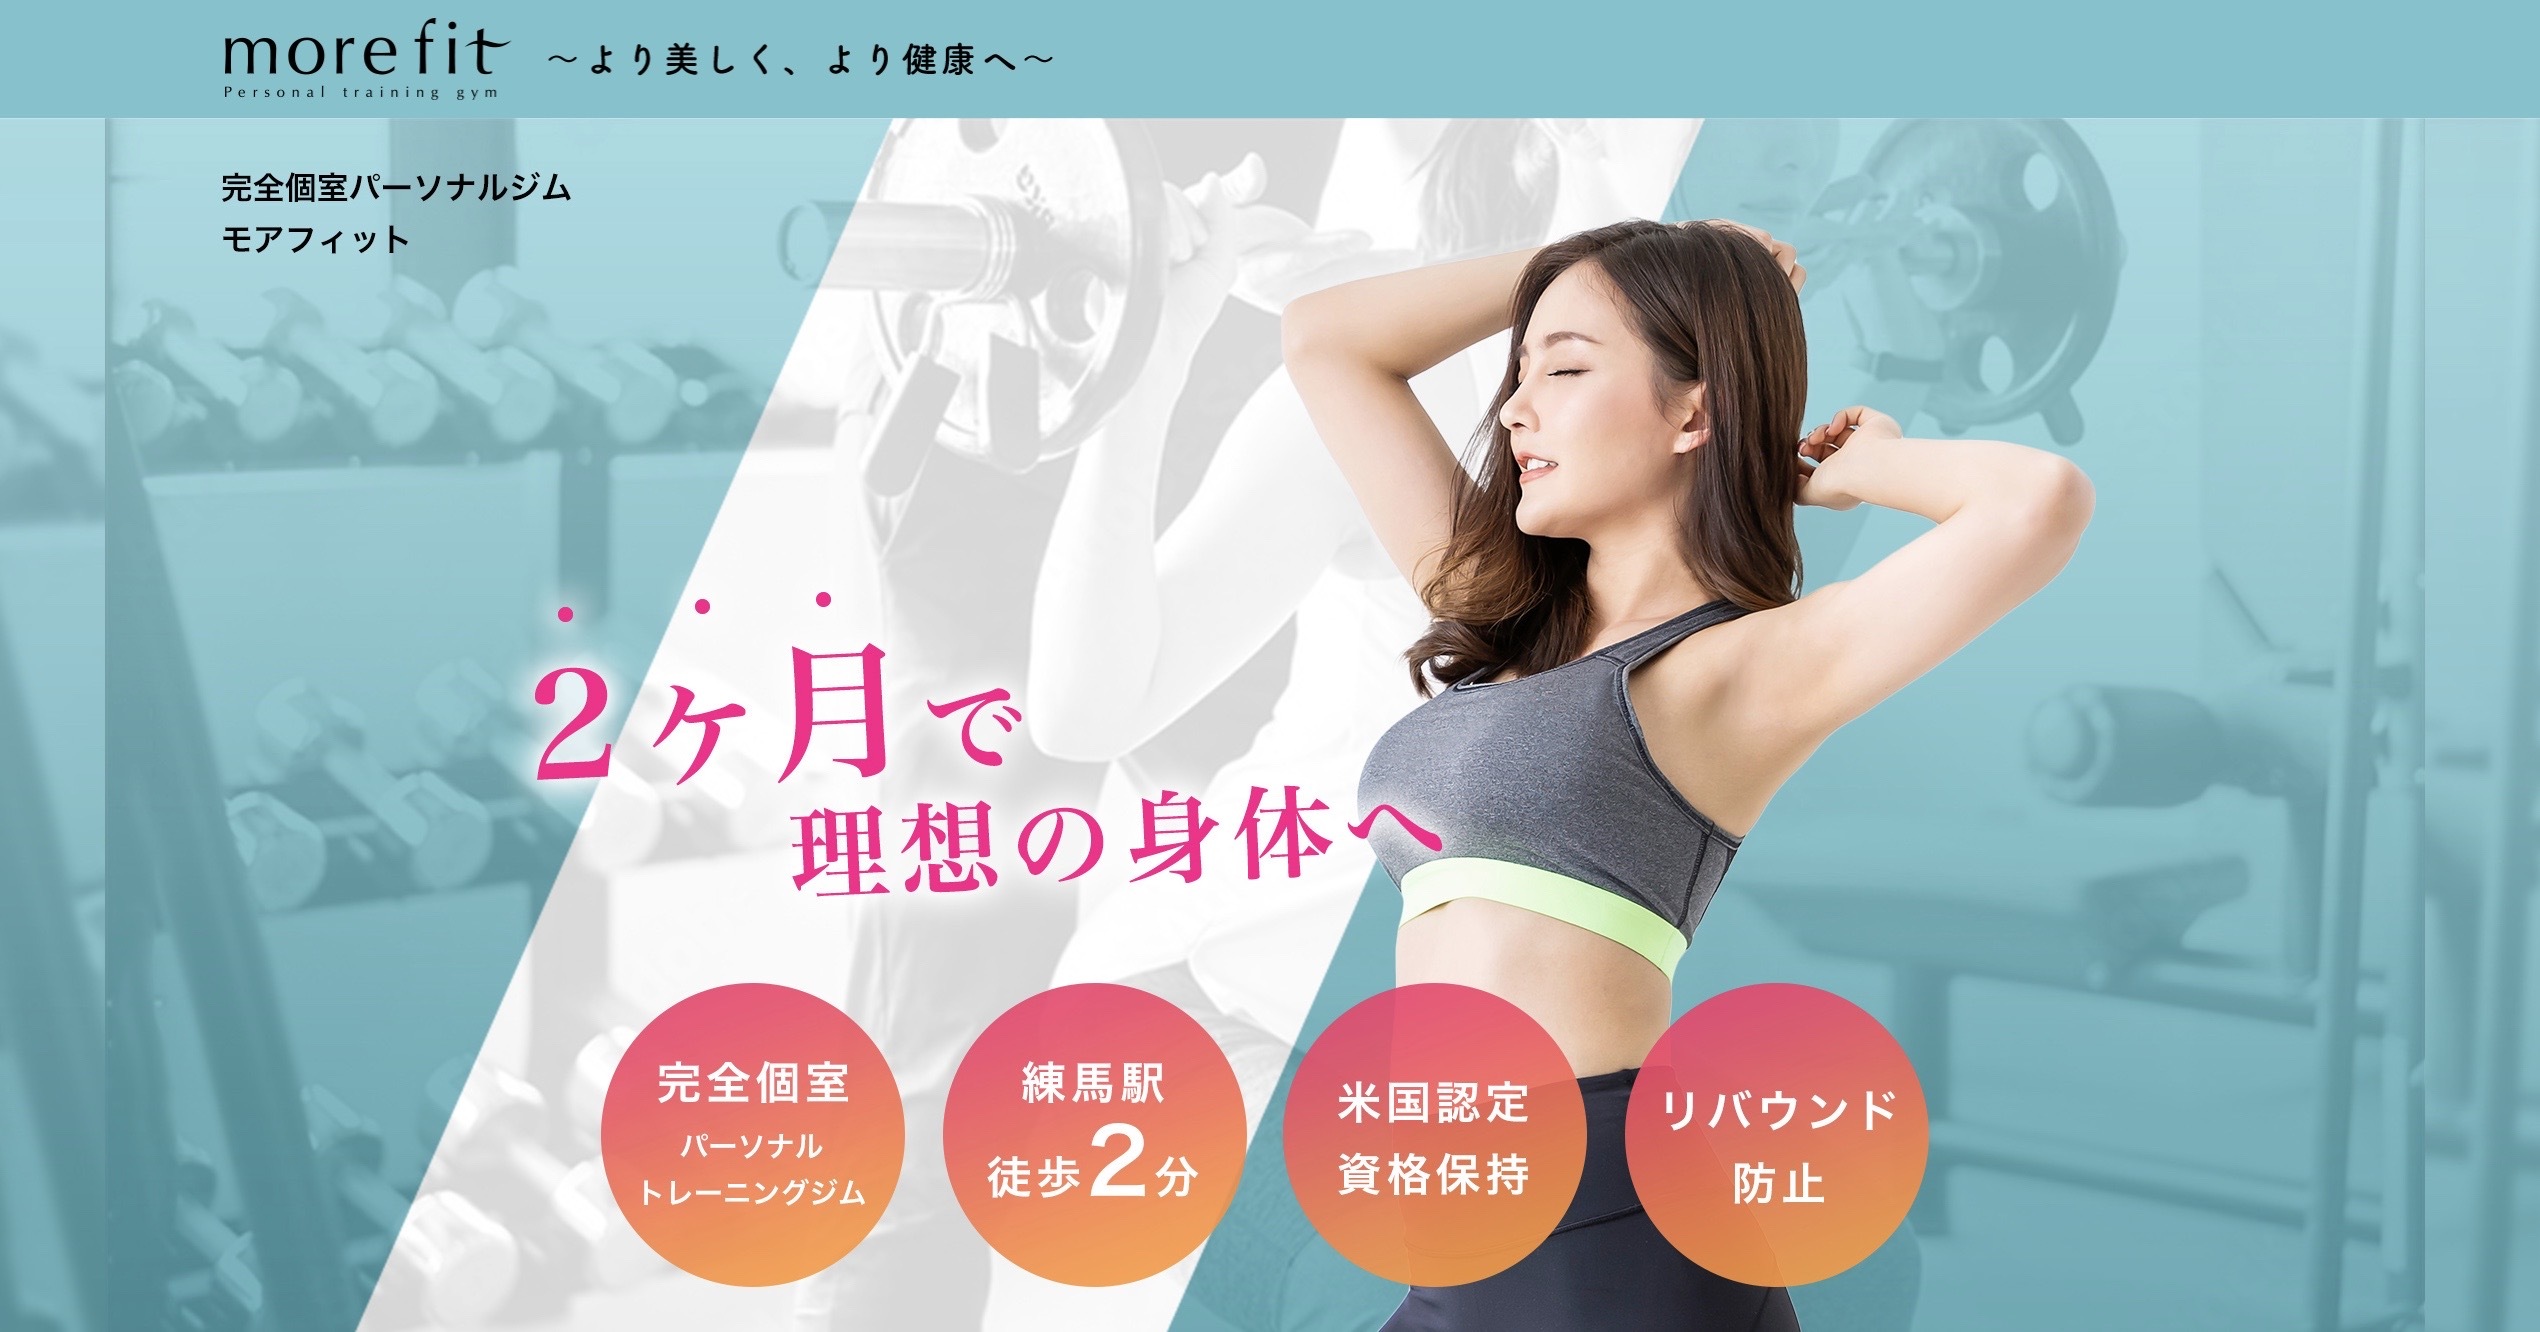 12.more fit 練馬店